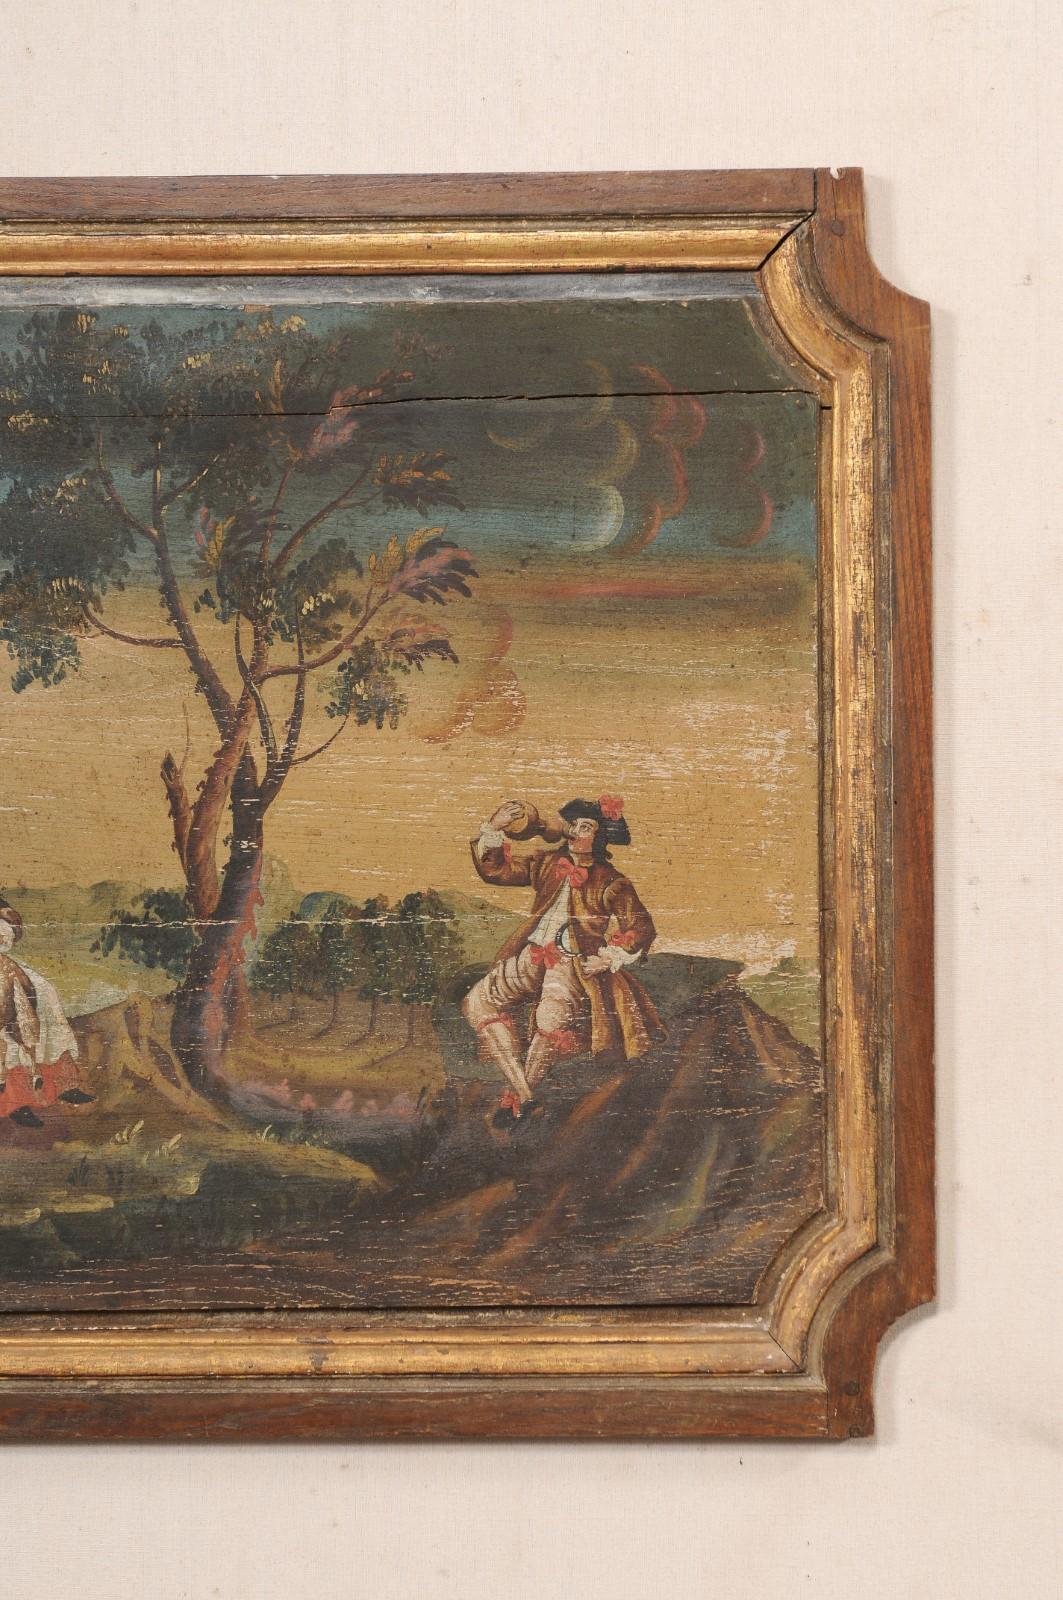 19th Century 19th C. French Landscape & Figures Painting on Wooden Plaque (4+ Ft Wide) For Sale